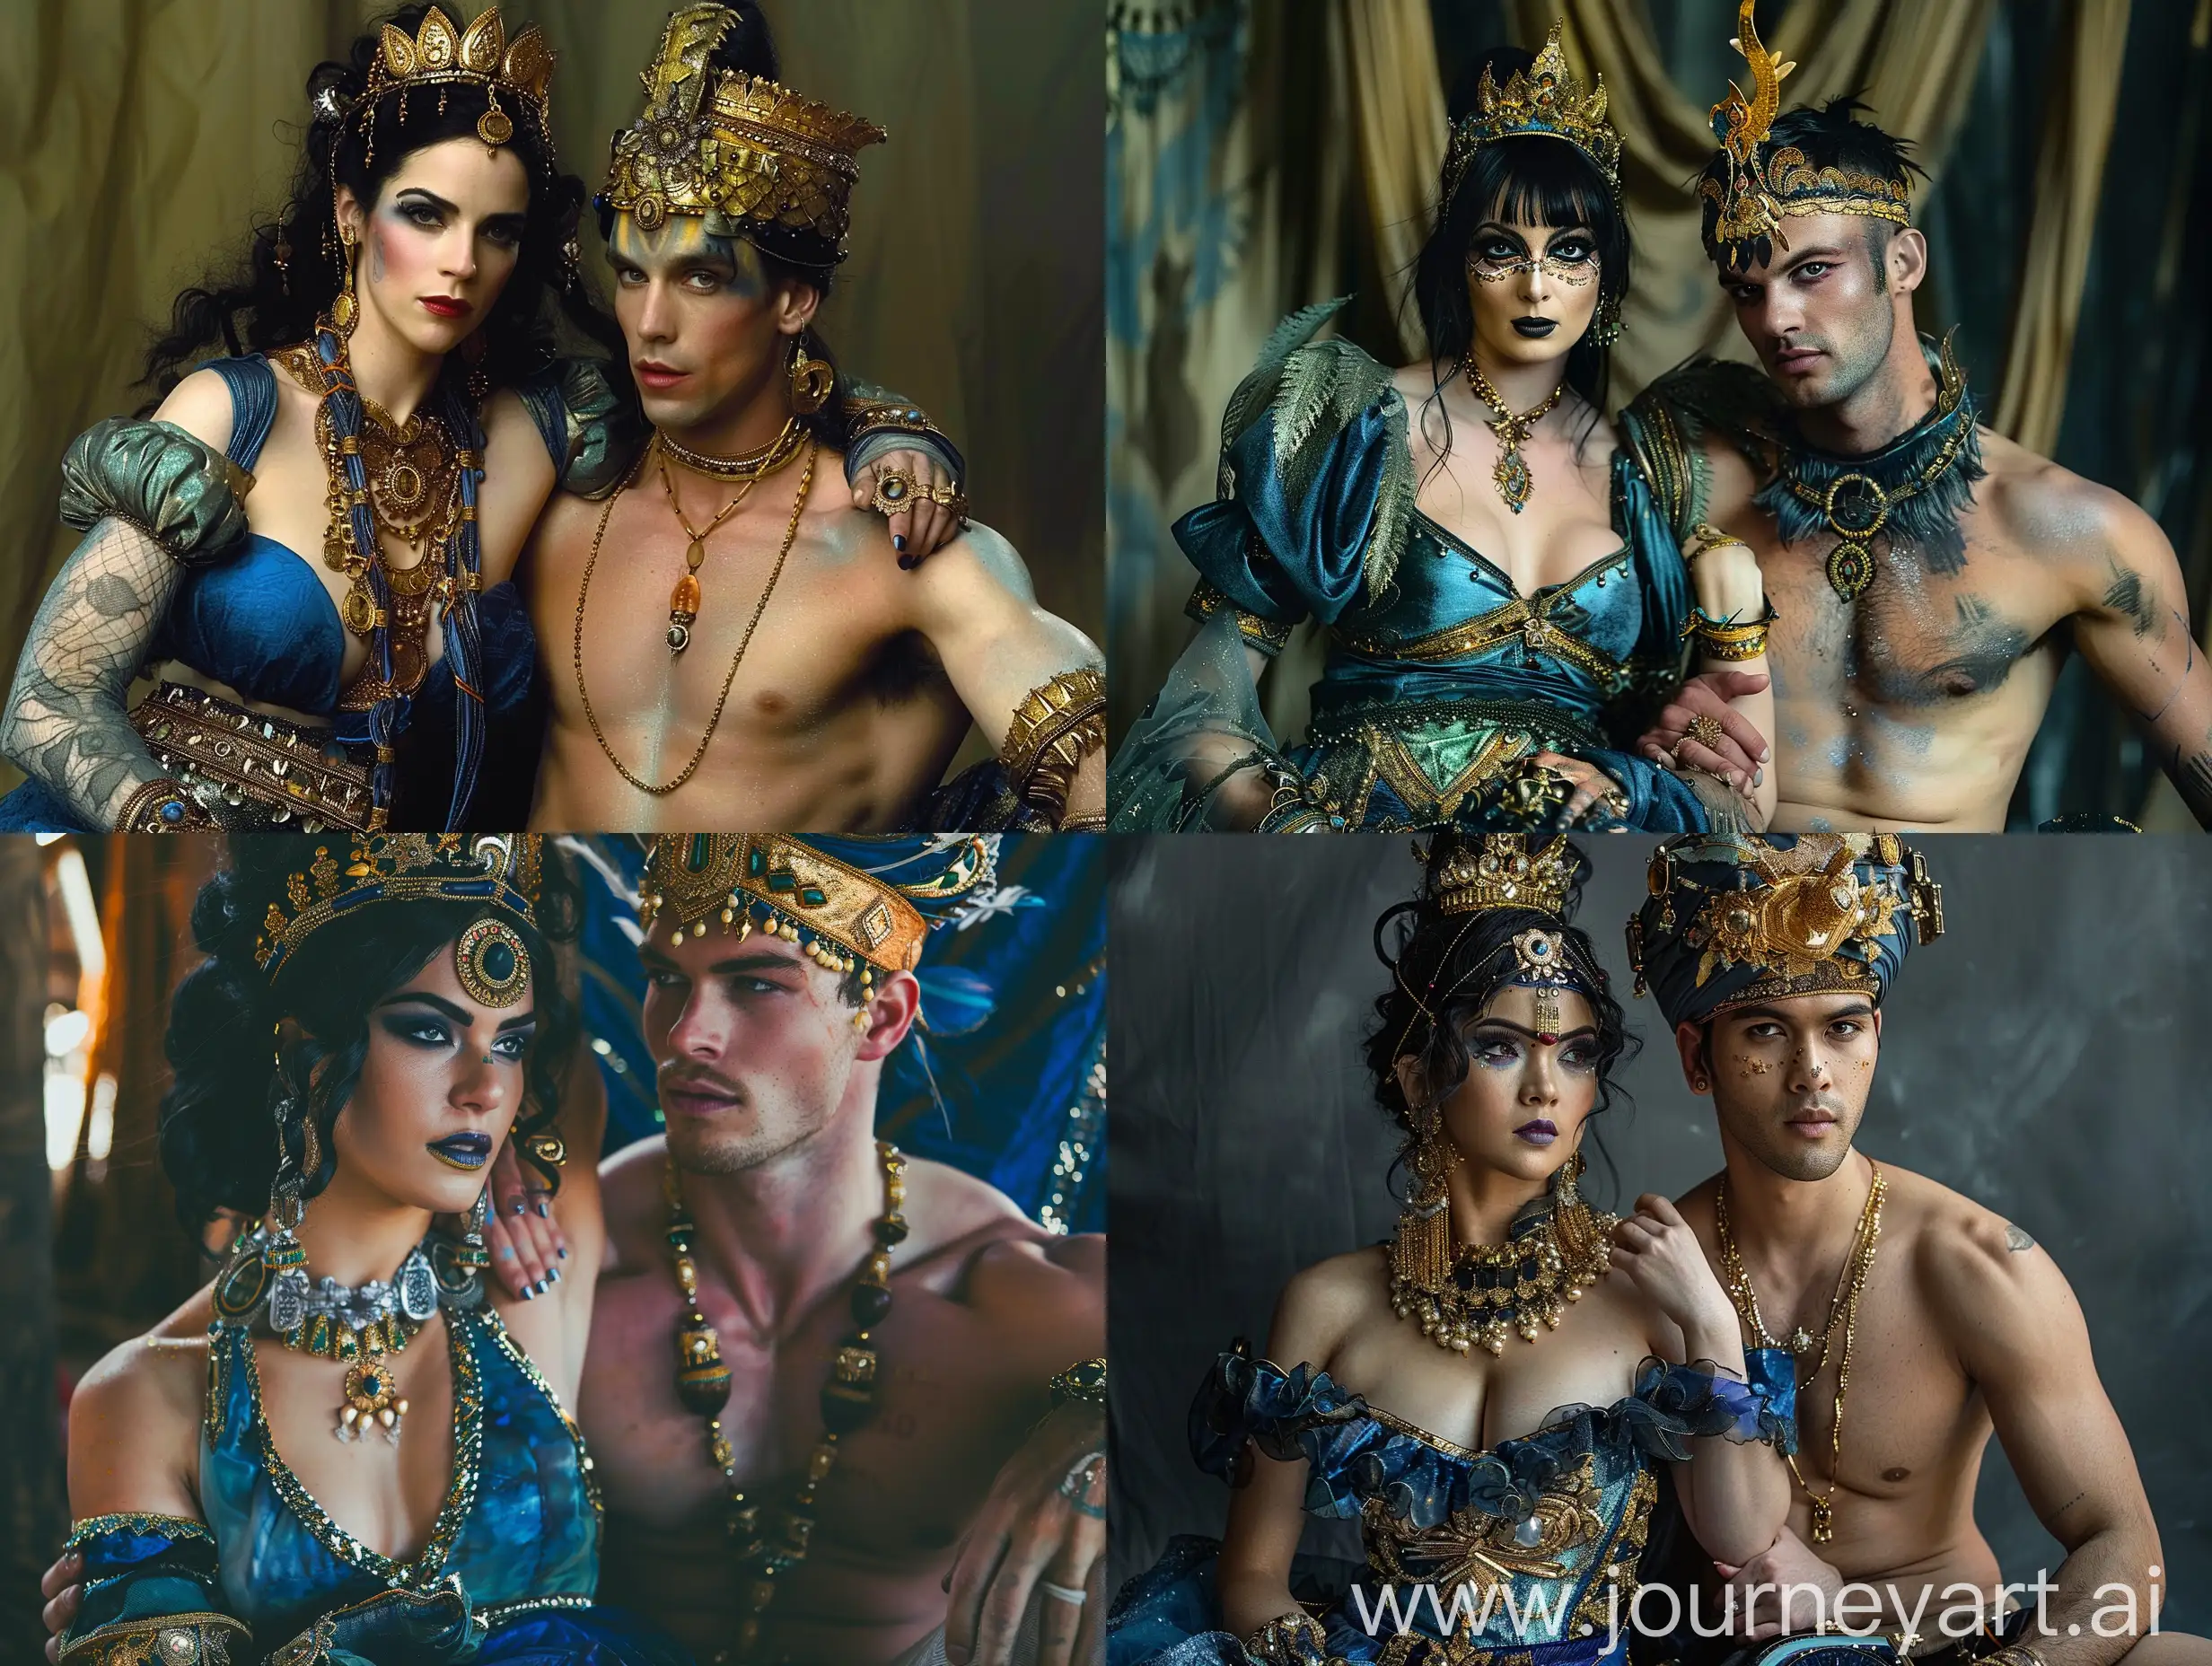 Regal-Couple-in-Ornate-Costumes-with-Elaborate-Jewelry-and-Makeup